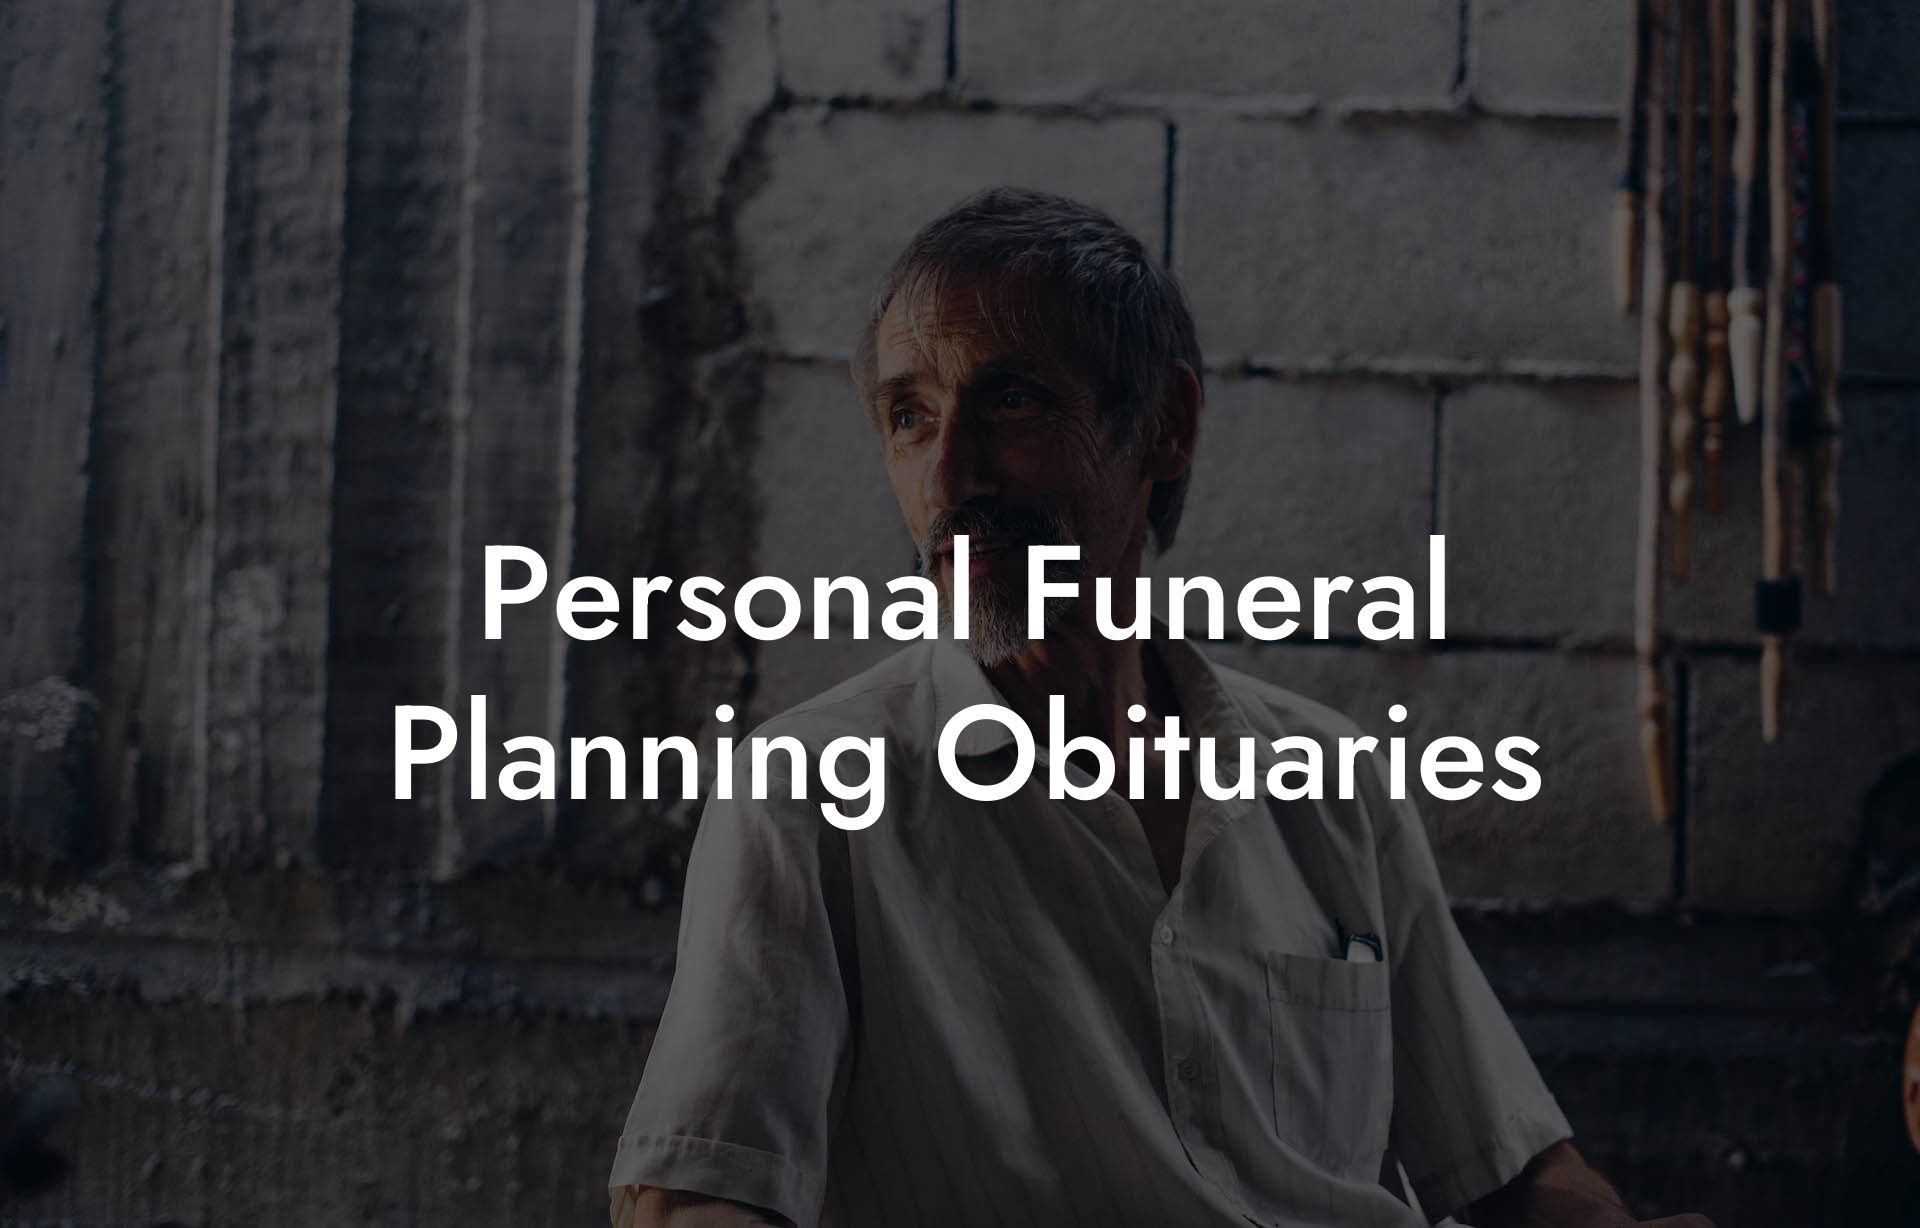 Personal Funeral Planning Obituaries